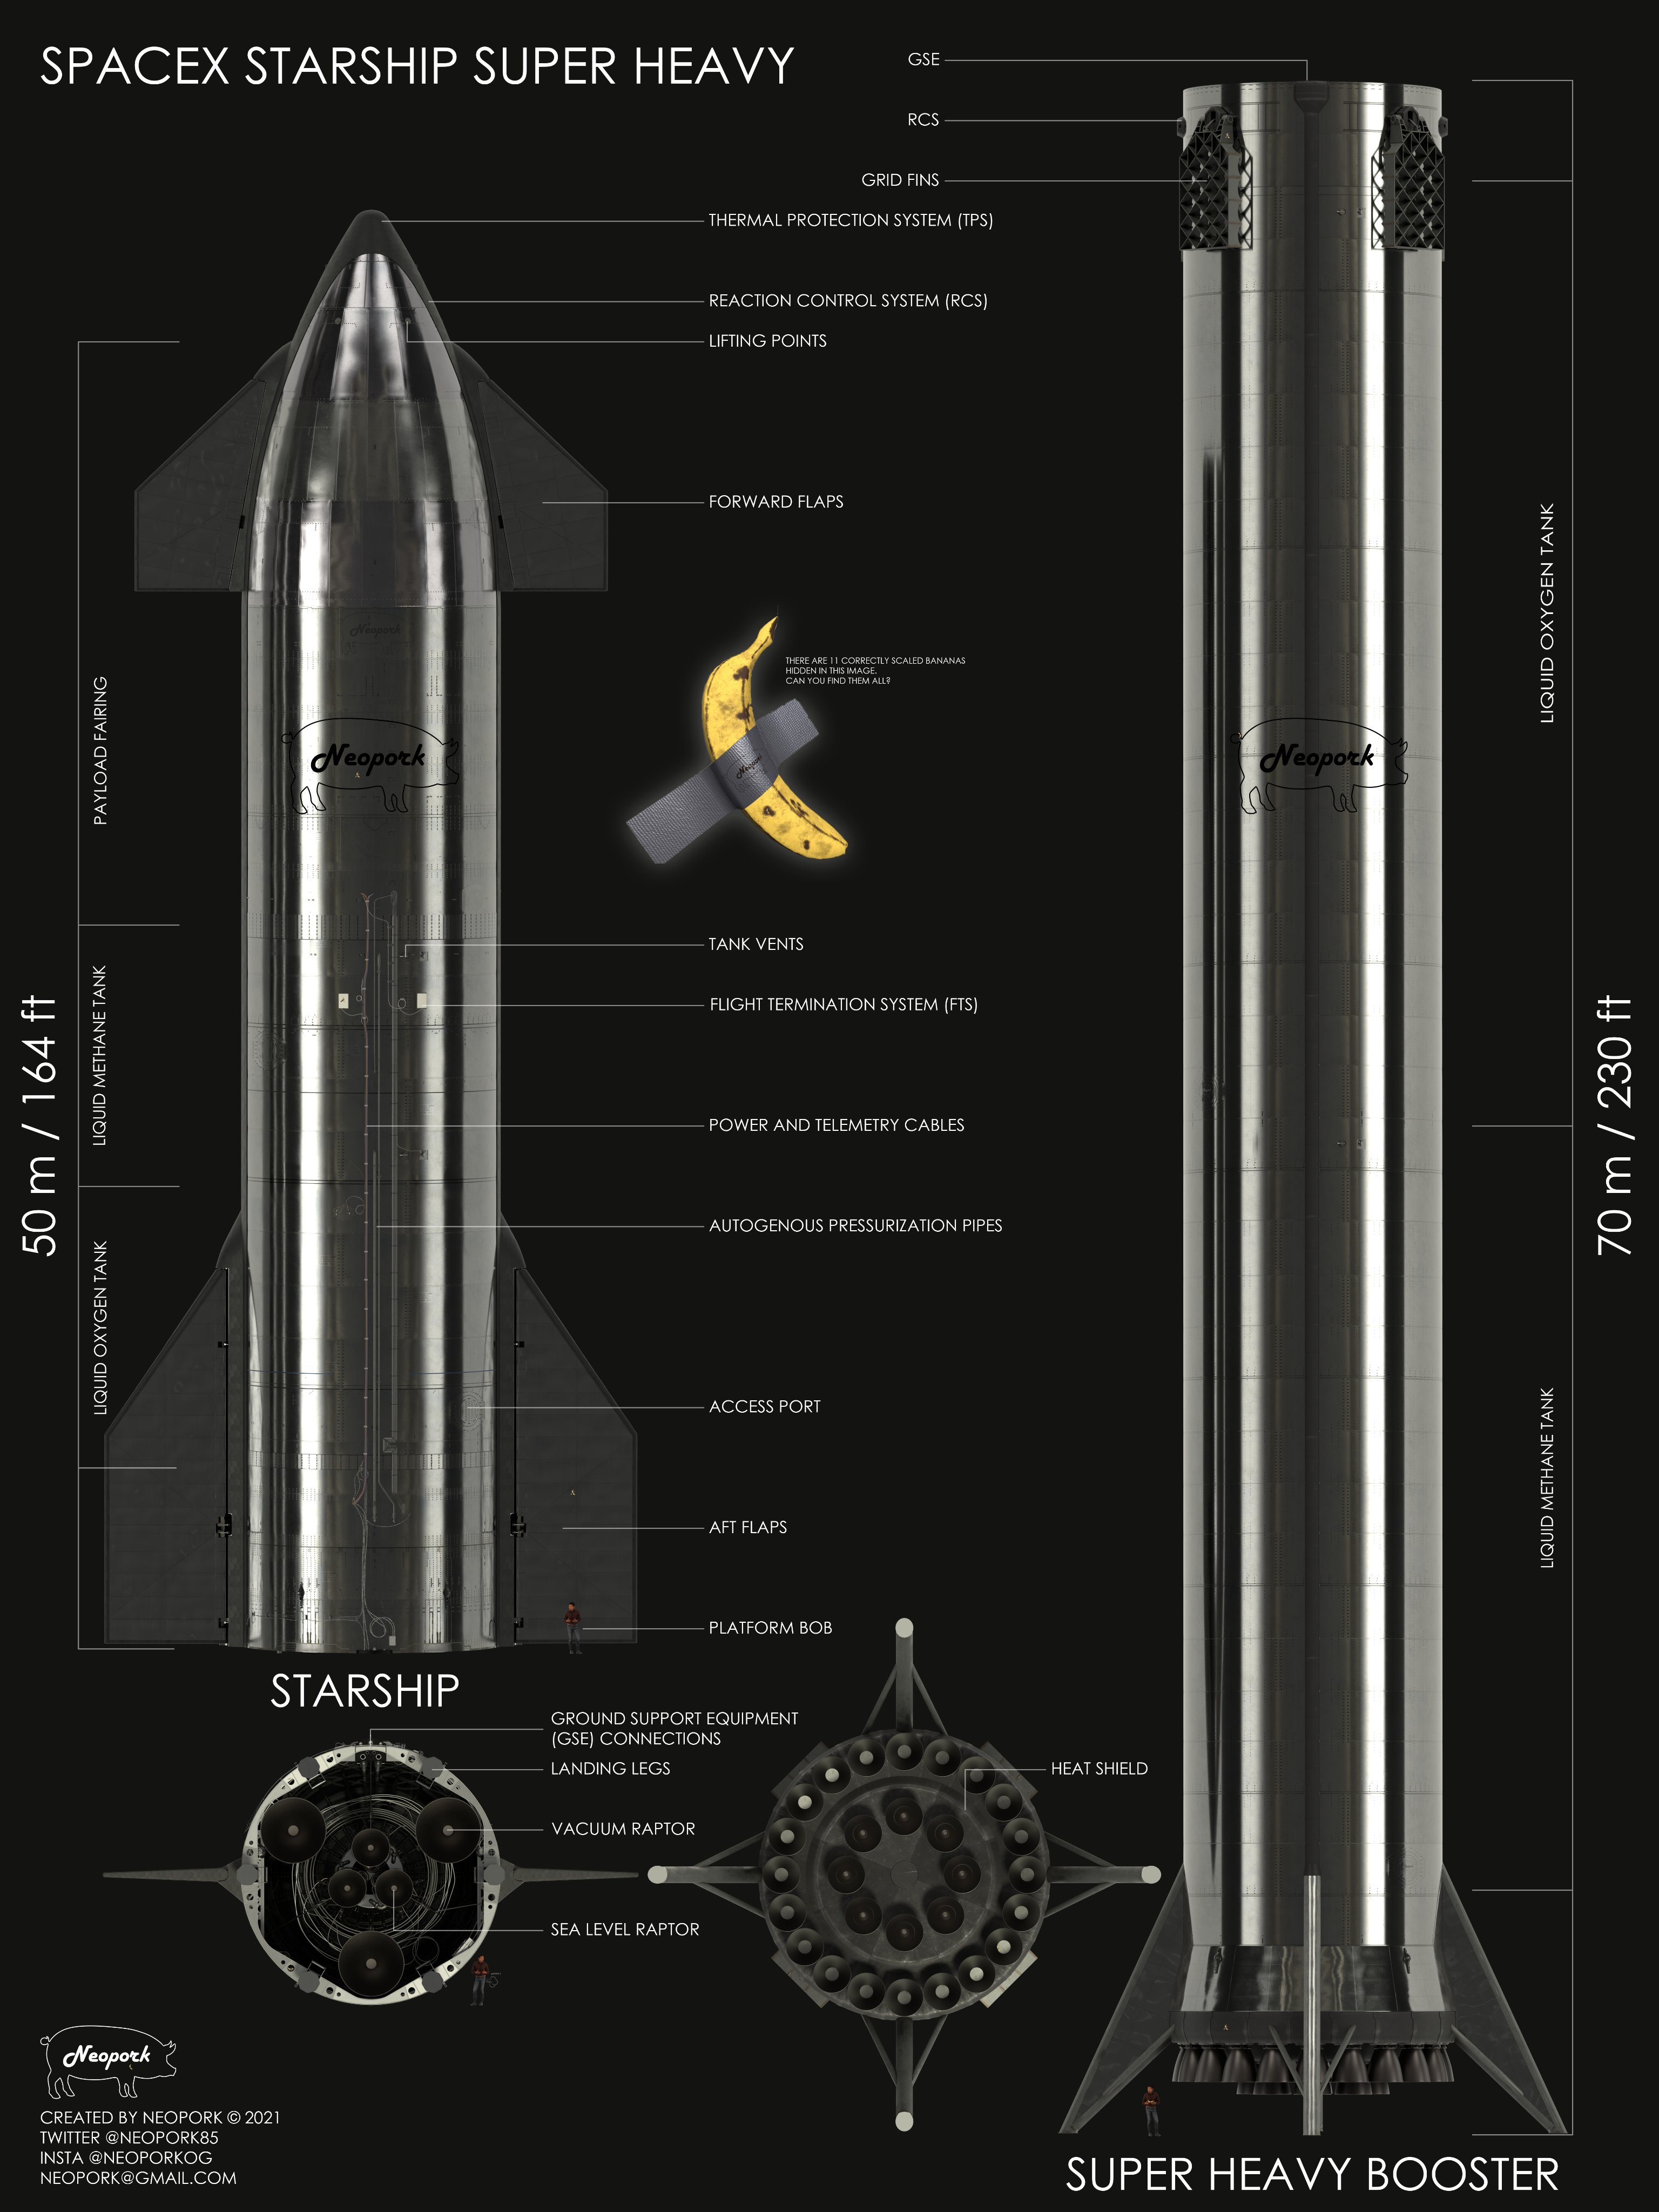 SpaceX assembling superheavy test rocket in Texas Now Official Starship ...